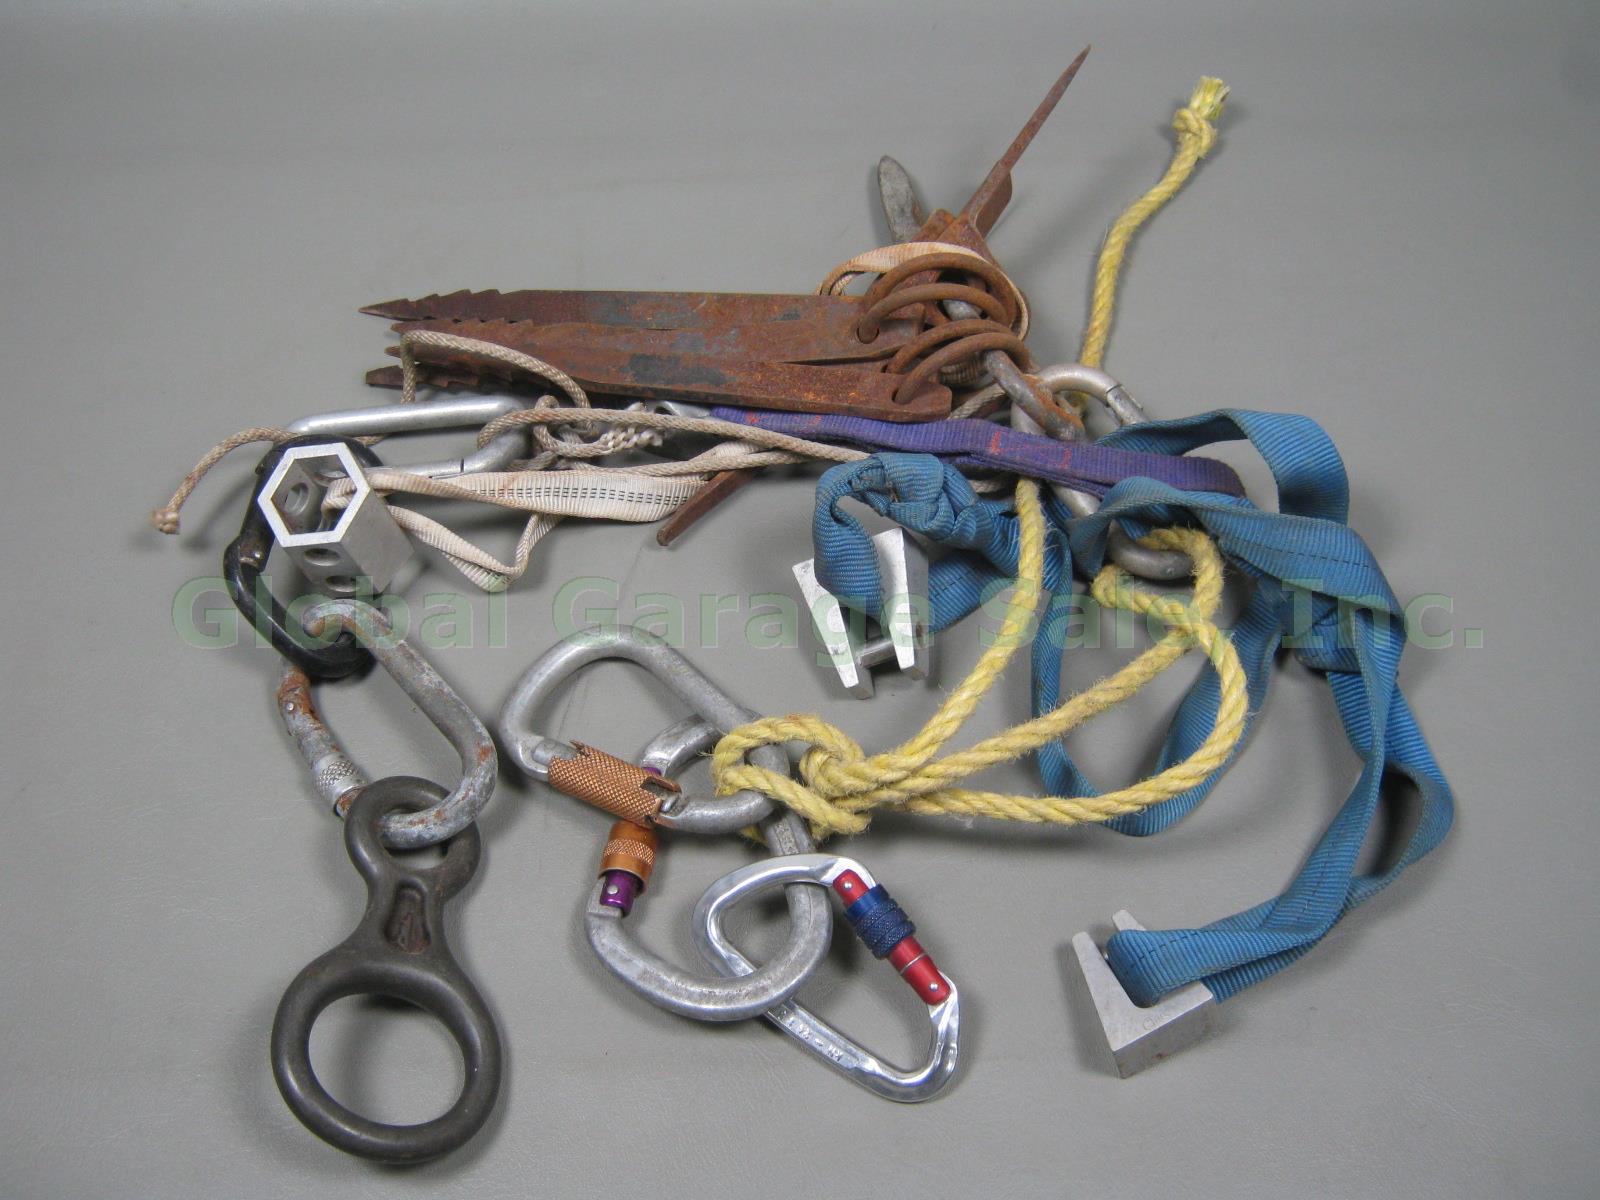 Rock Ice Climbing Gear Lot 8 Carabiner Locking Descender Drilled Hexentric Chock